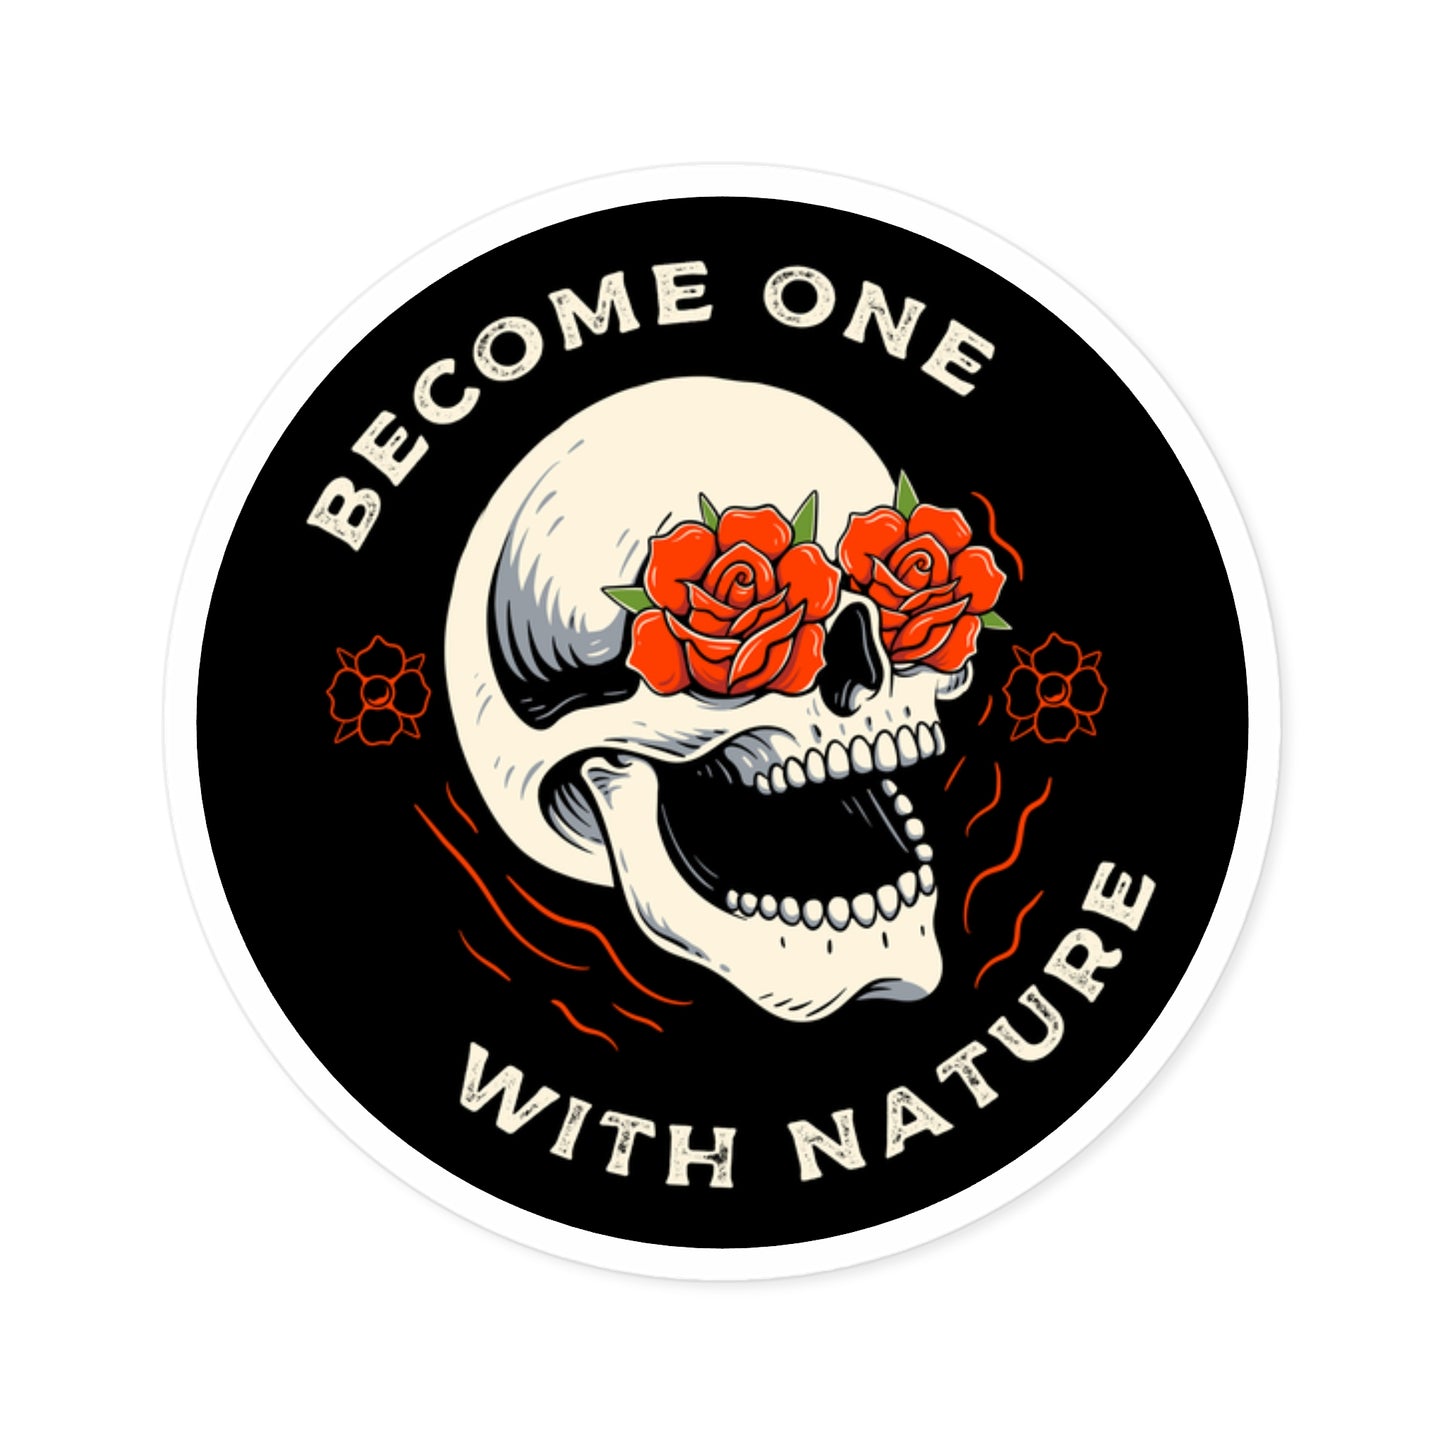 Become One With Nature Round Sticker